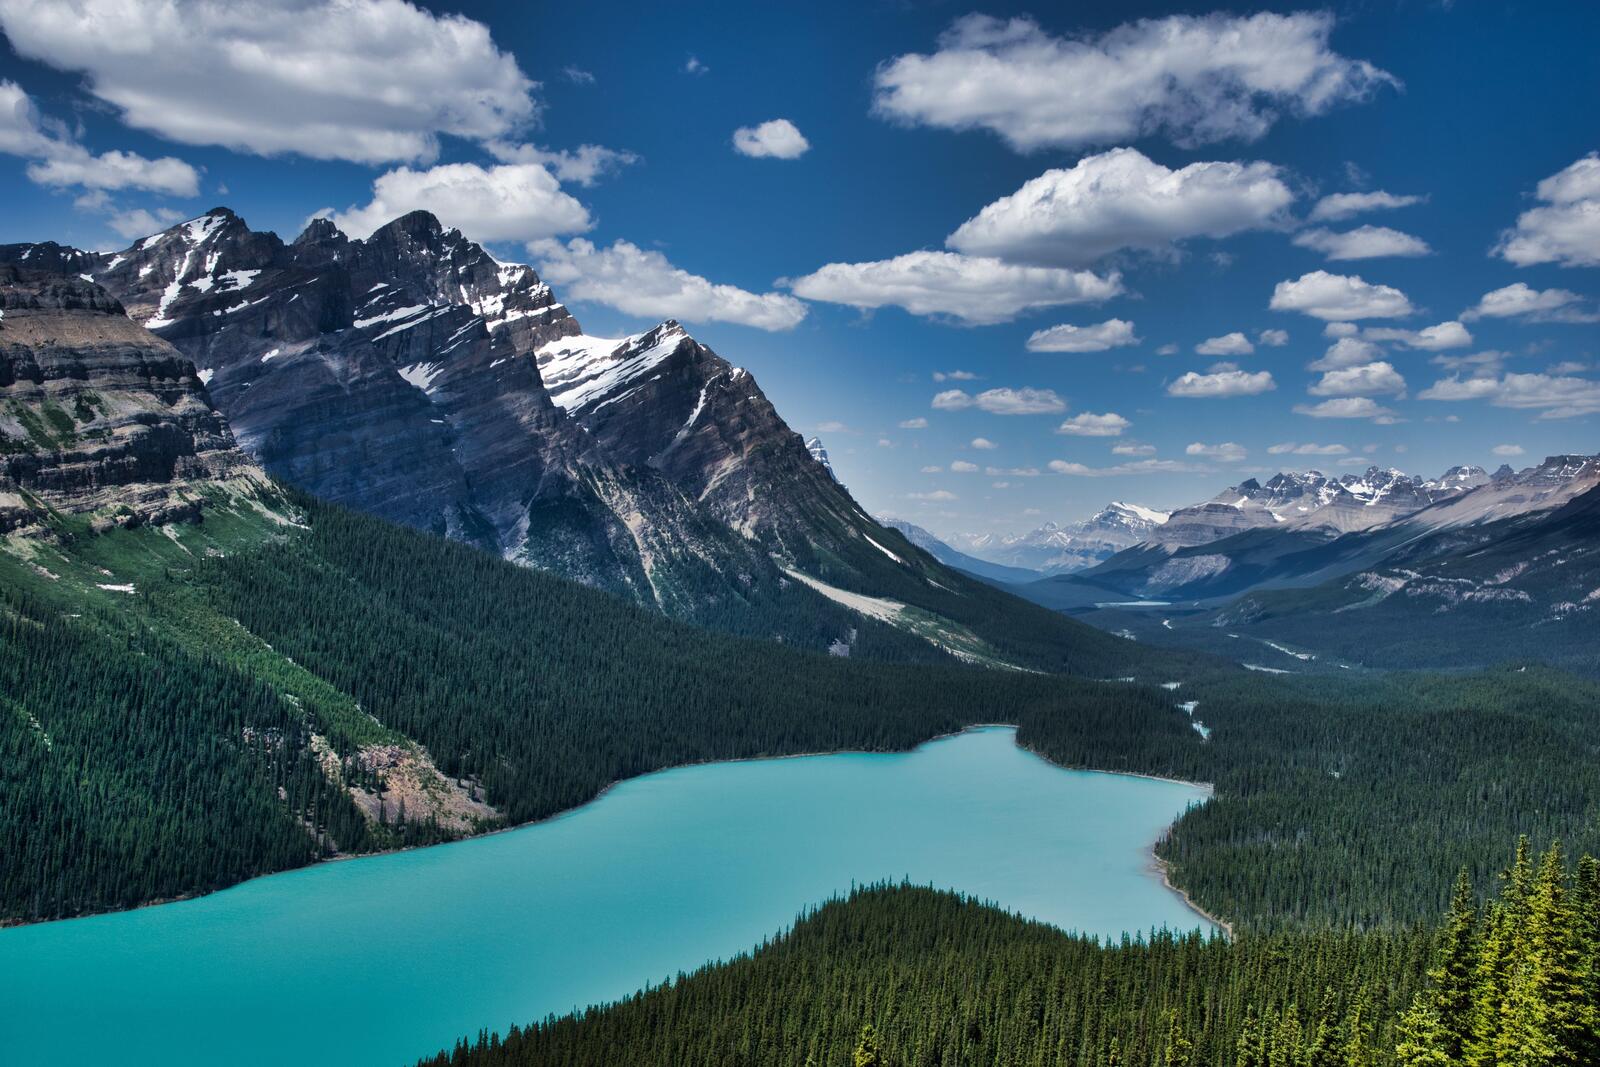 Wallpapers Peyto lake Banff national Park Canadian Rocky mountains on the desktop